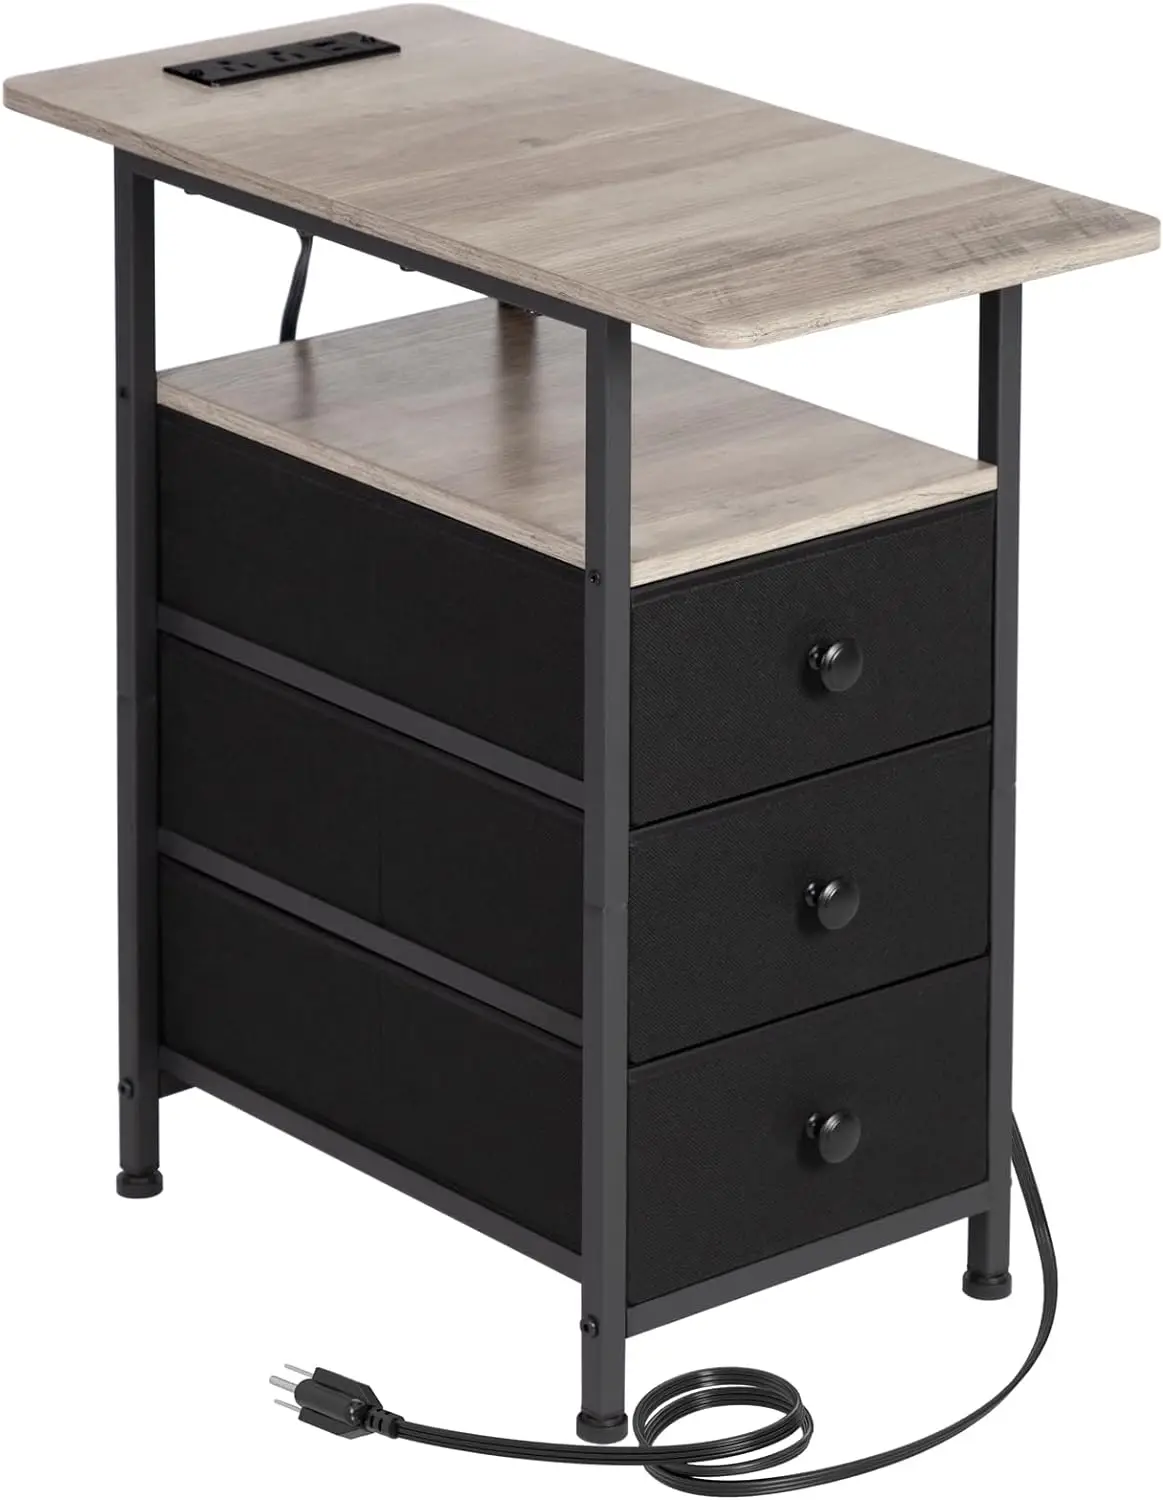 

Narrow Side Table with Charging Station, Slim End Table with USB Ports and Outlets, Nightstand with 3 Fabric Drawers for Bedroom